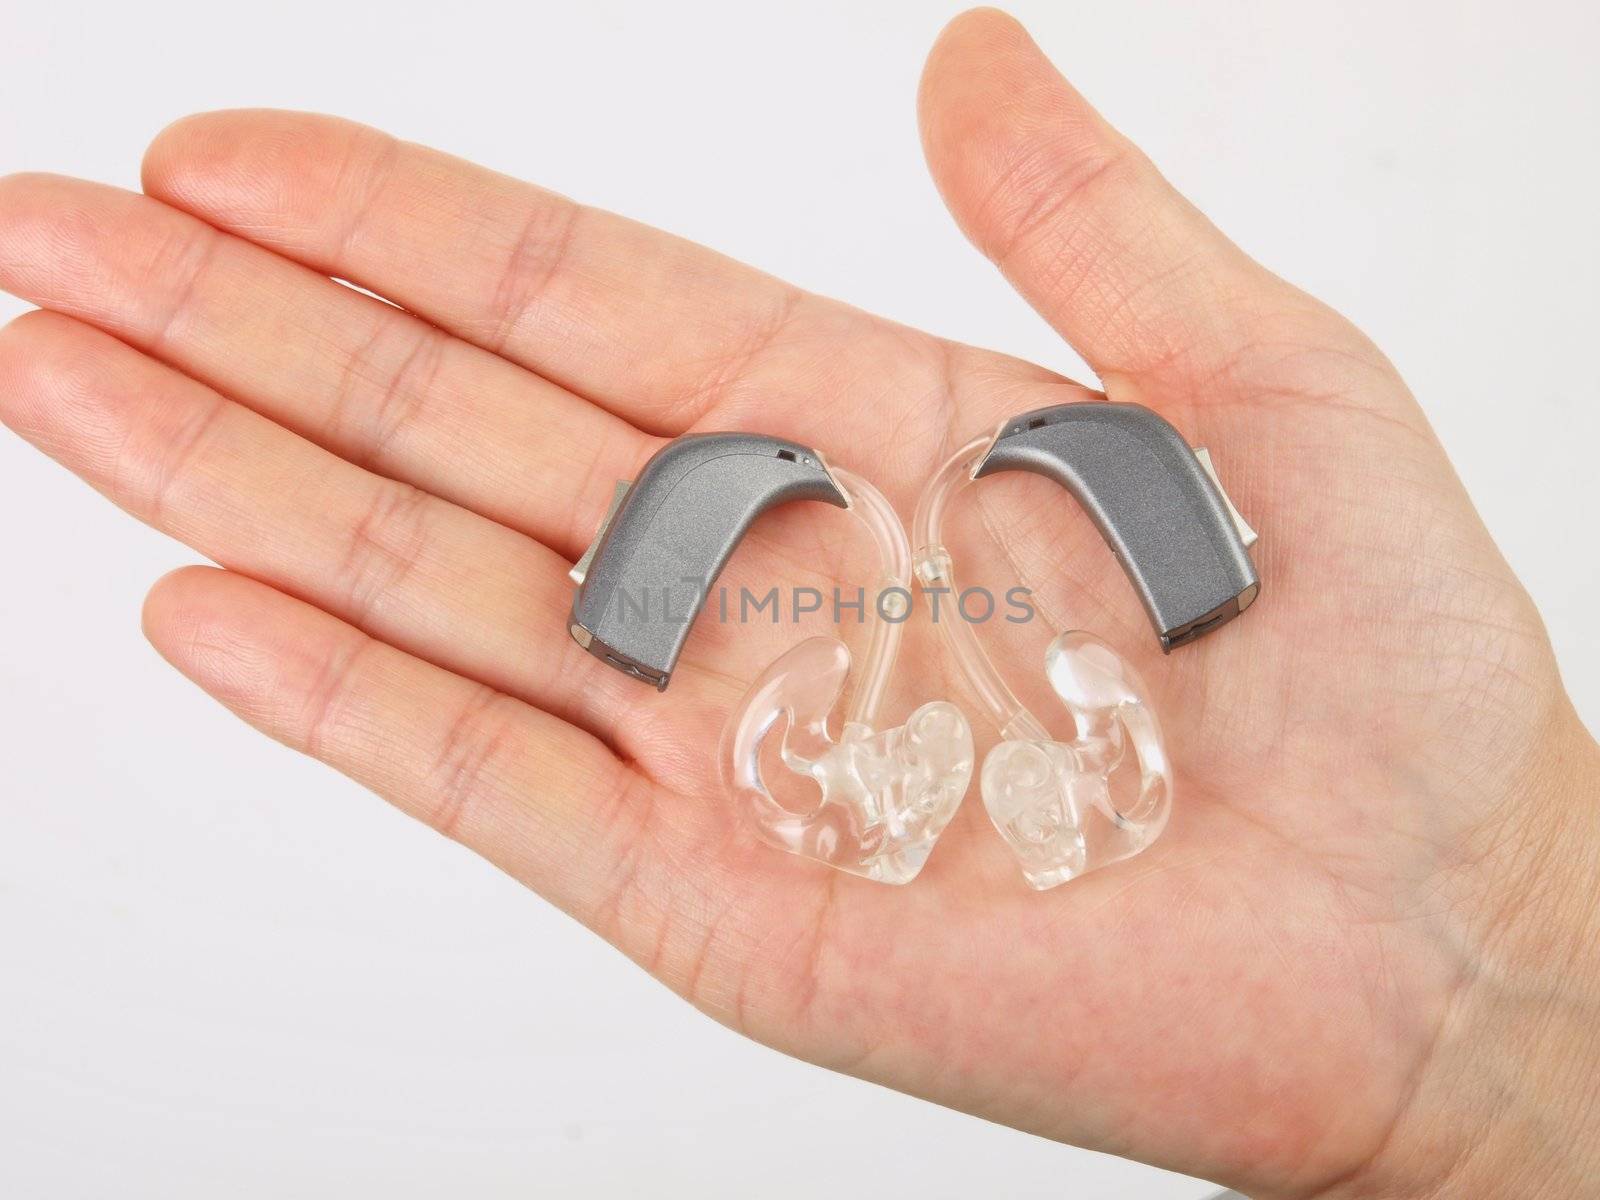 Hand holding hearing aid by dotweb